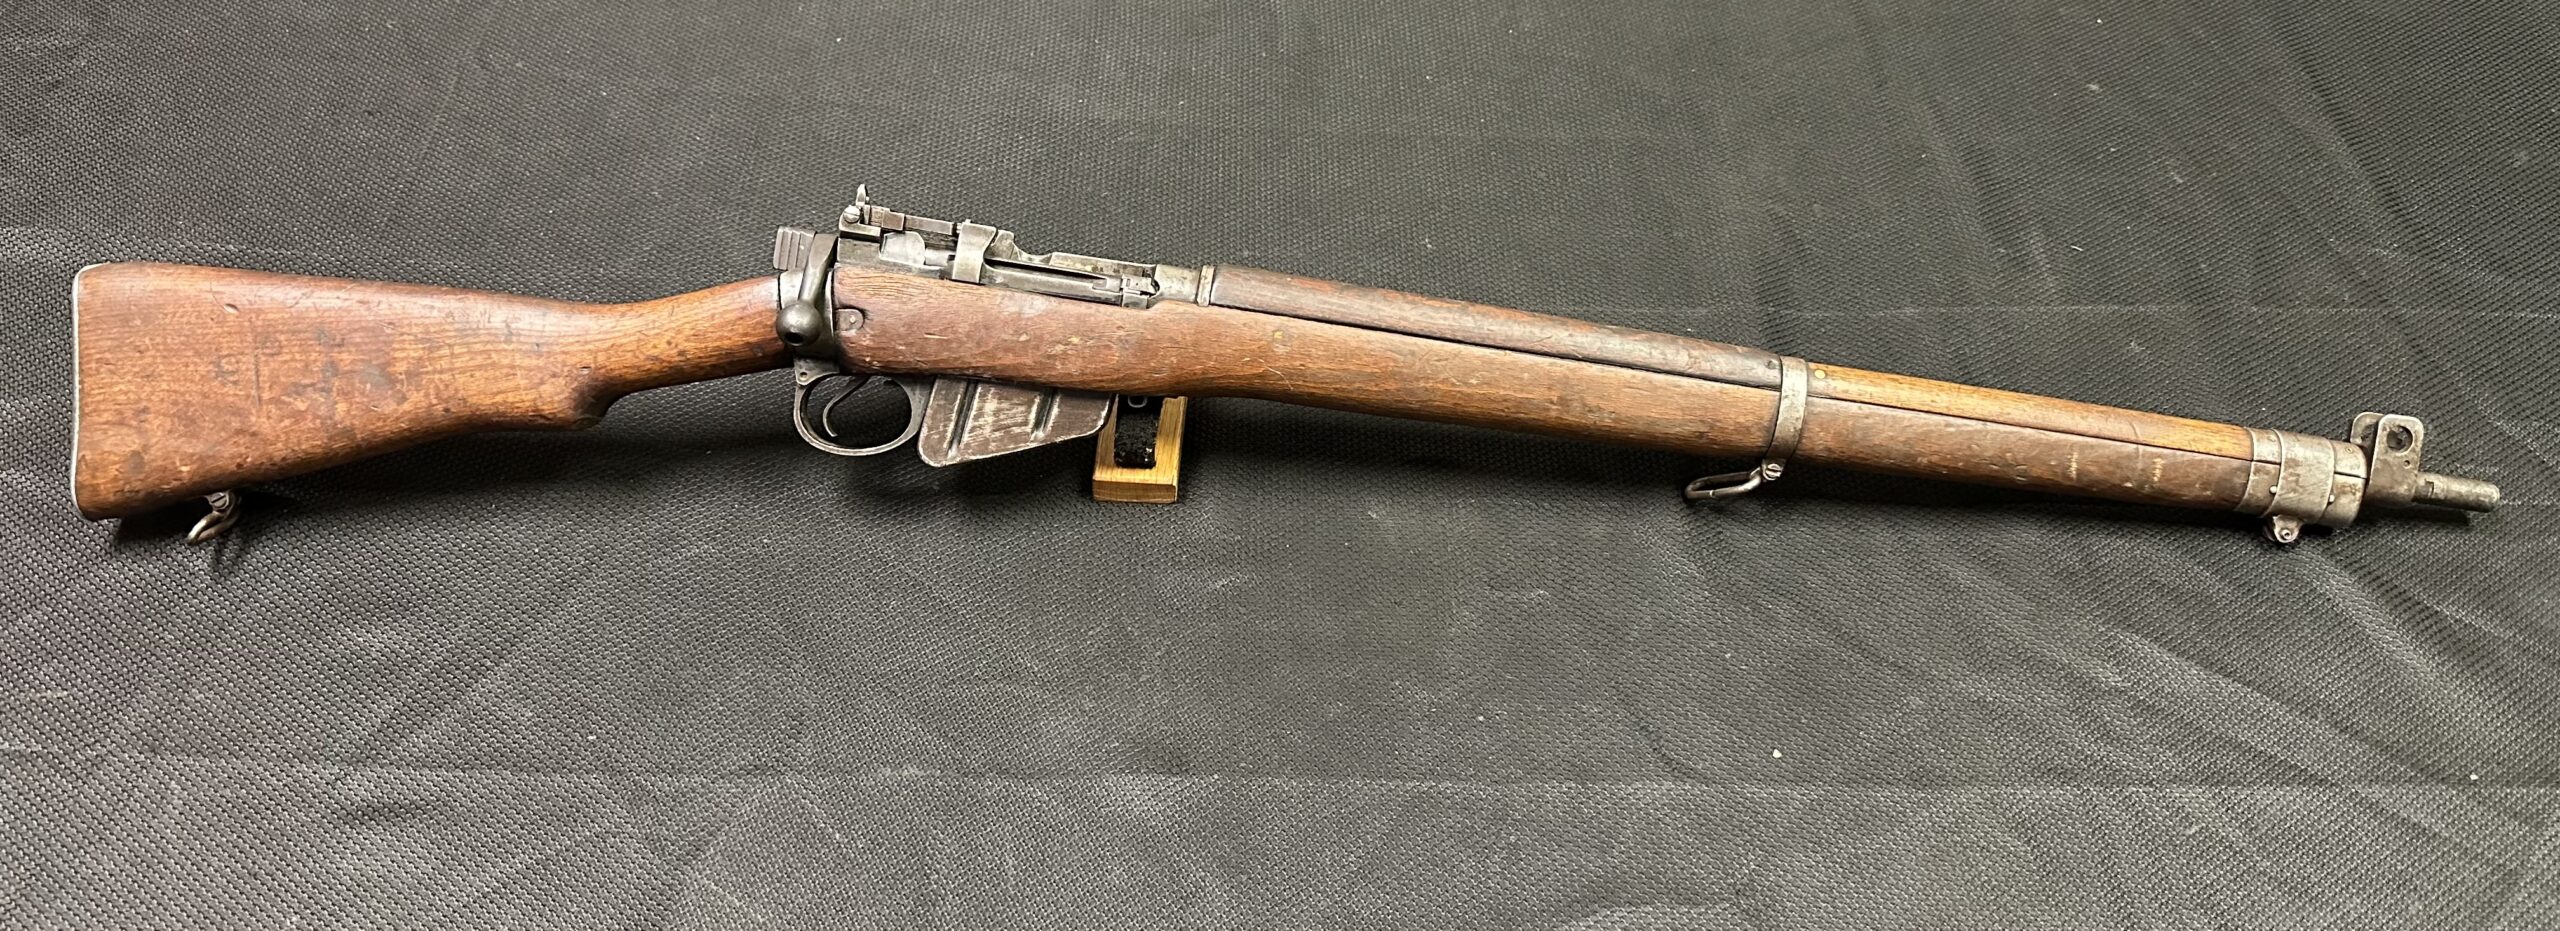 Sold at Auction: Long Branch Enfield No 4 Mk I* Bolt-action Rifle